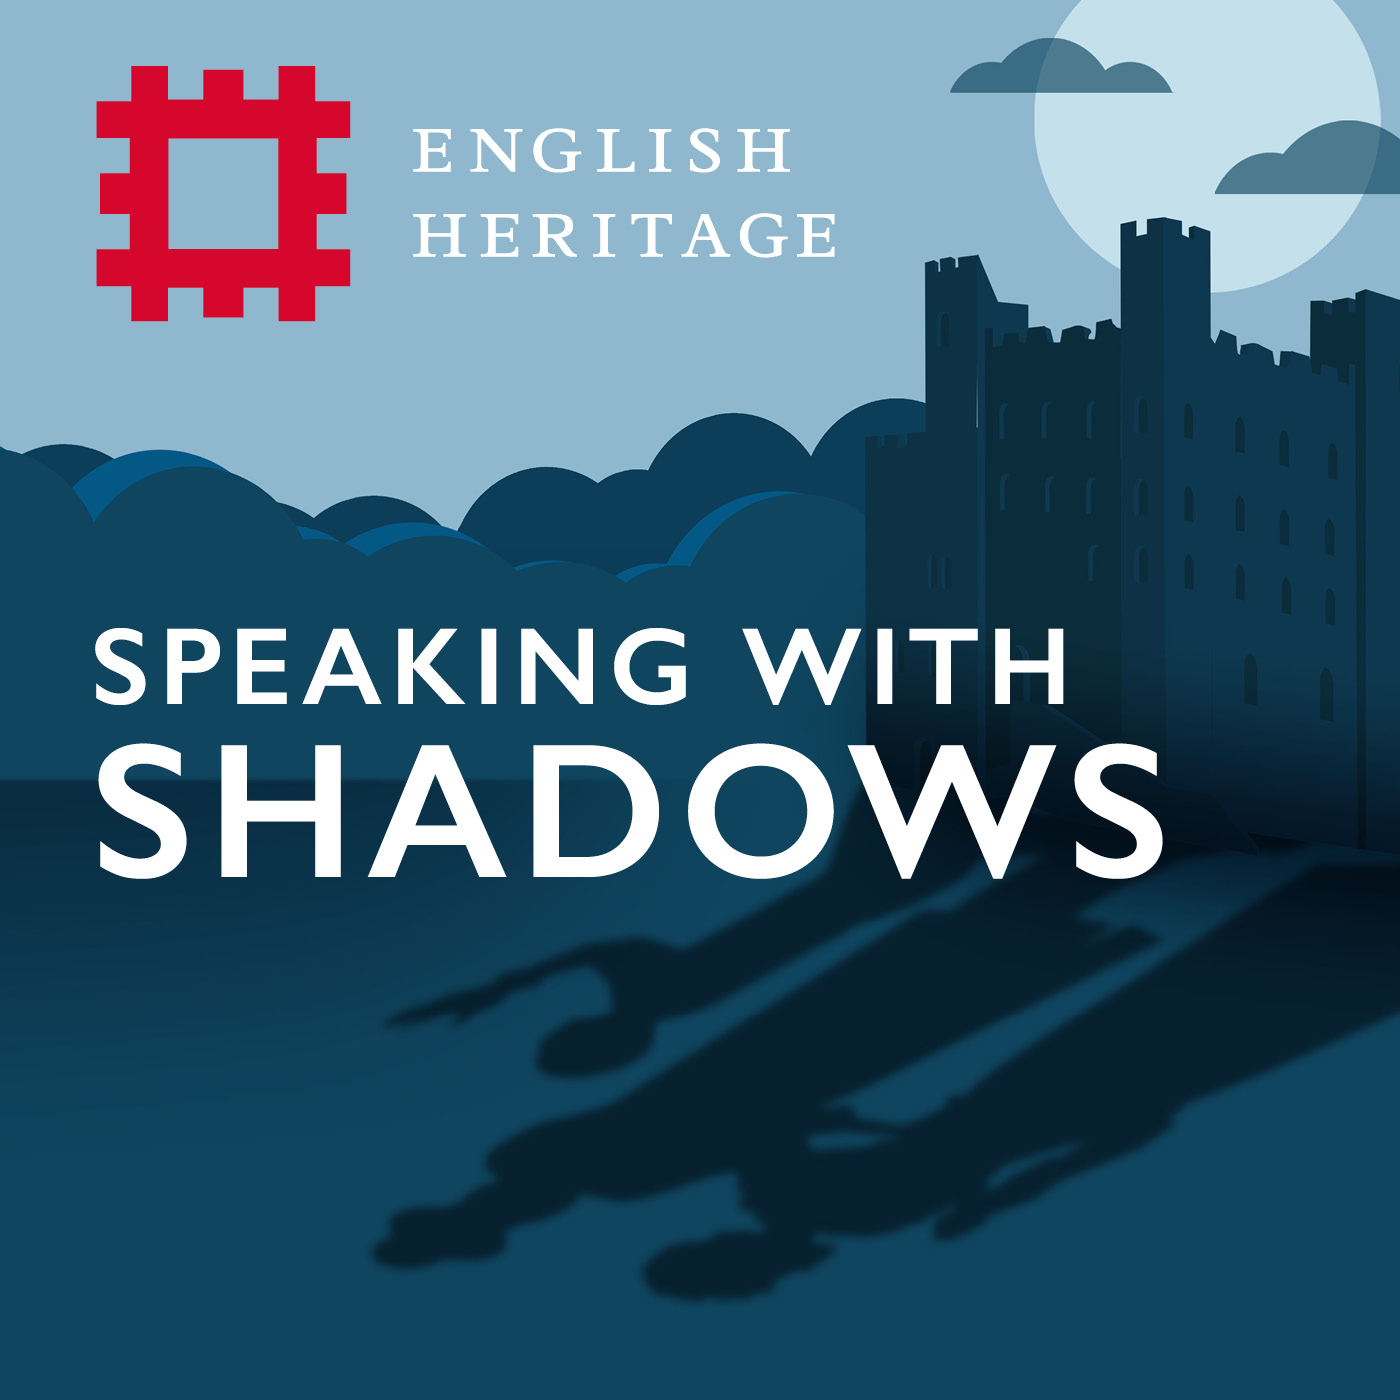 Speaking with Shadows Returns on Tuesday 29th March